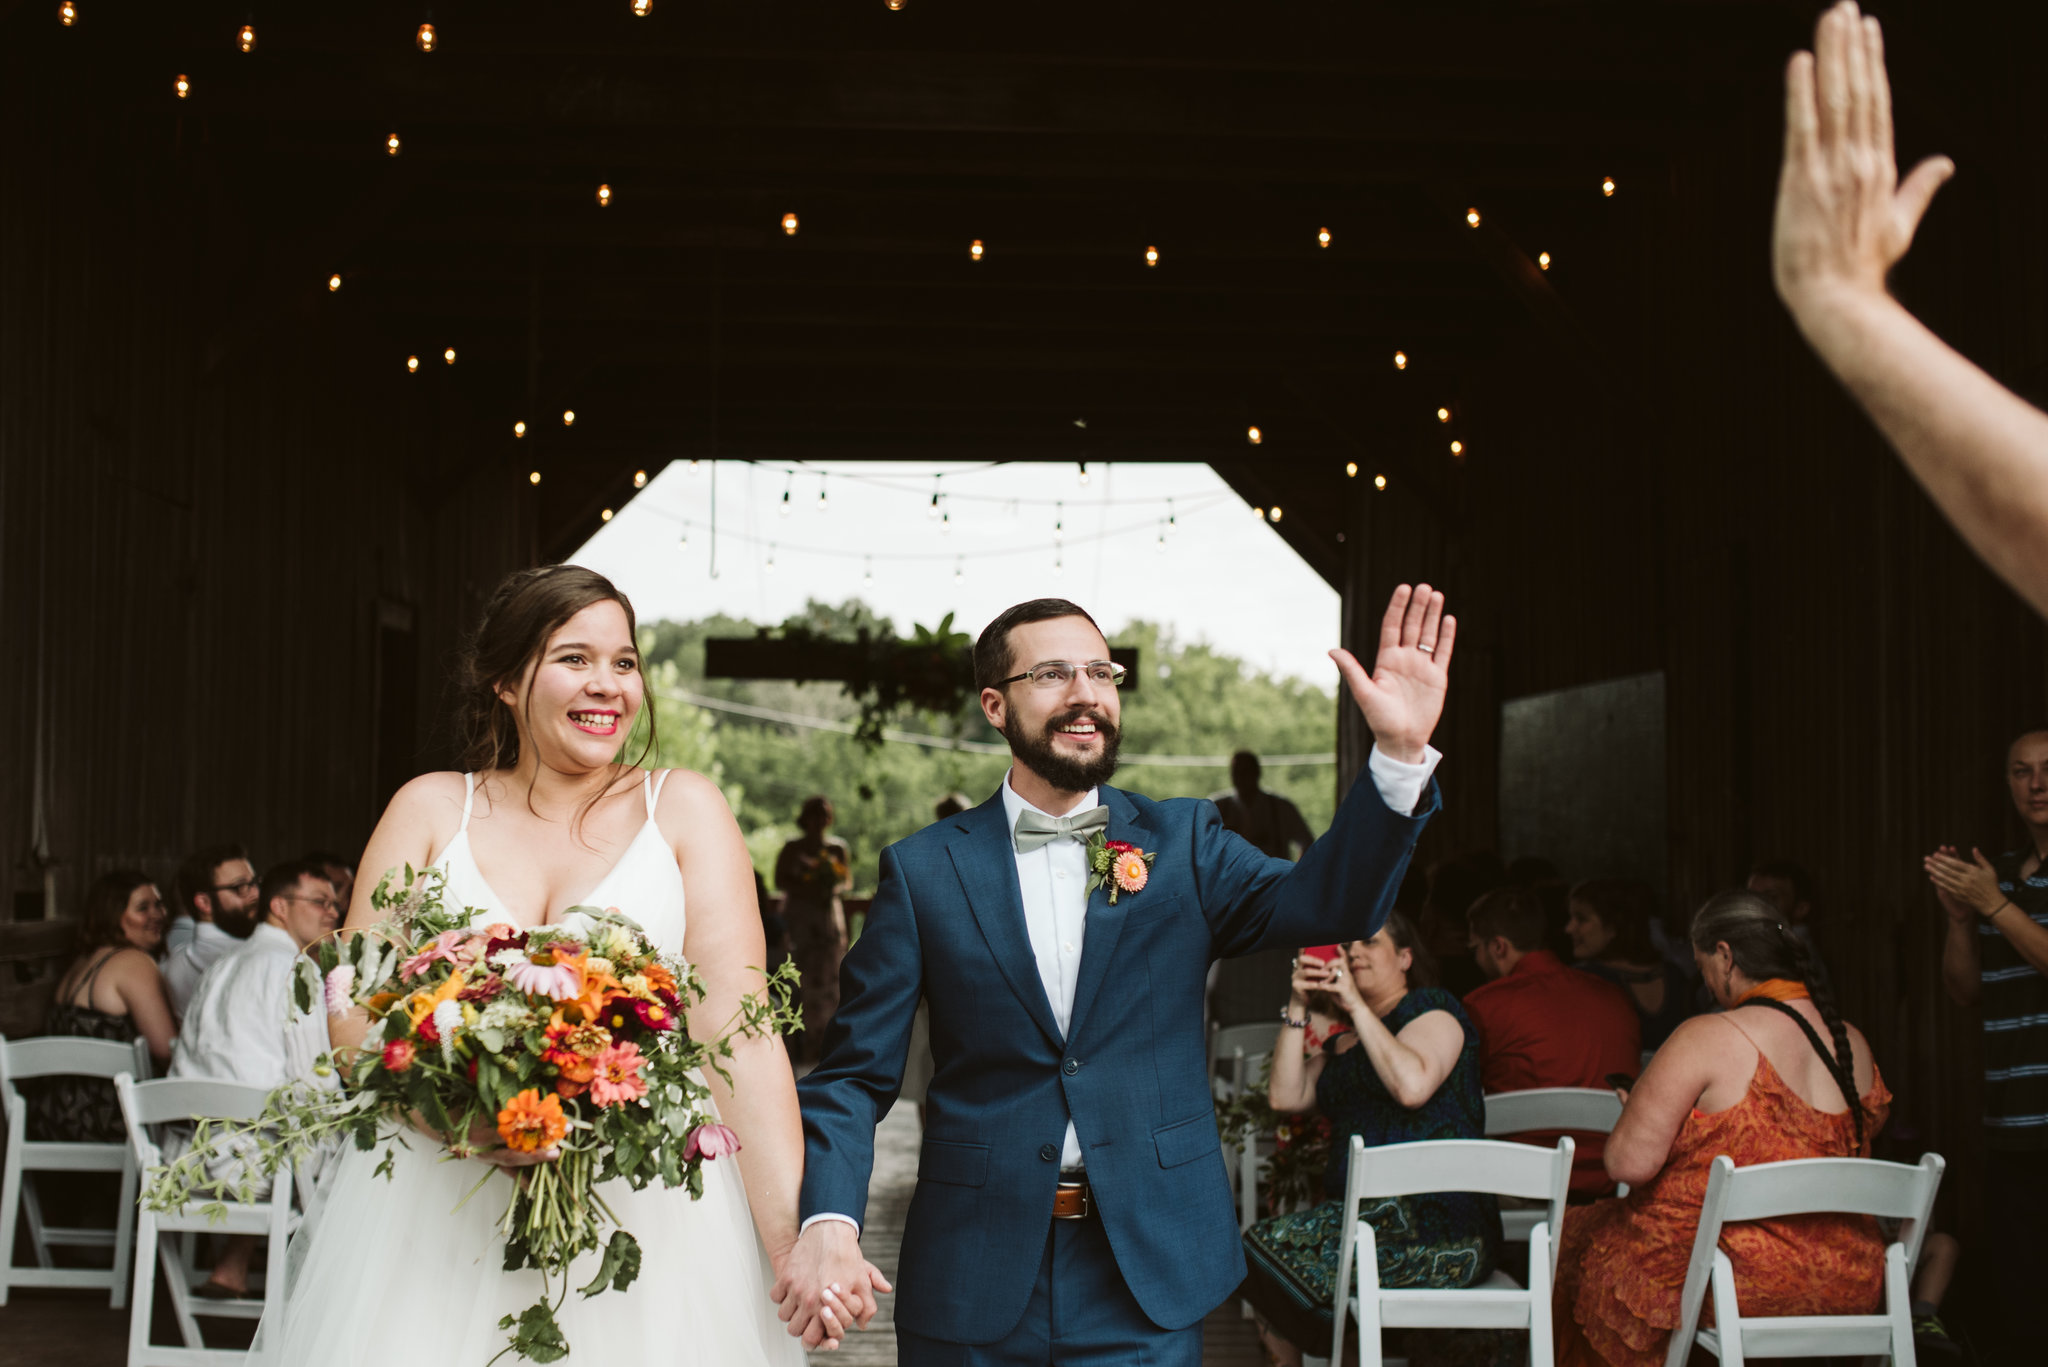 Rocklands Farm, Maryland, Intimate Wedding, Baltimore Wedding Photographer, Sungold Flower Co, Rustic, Romantic, Barn Wedding, Bride and Groom Just Married, Walking Down Aisle